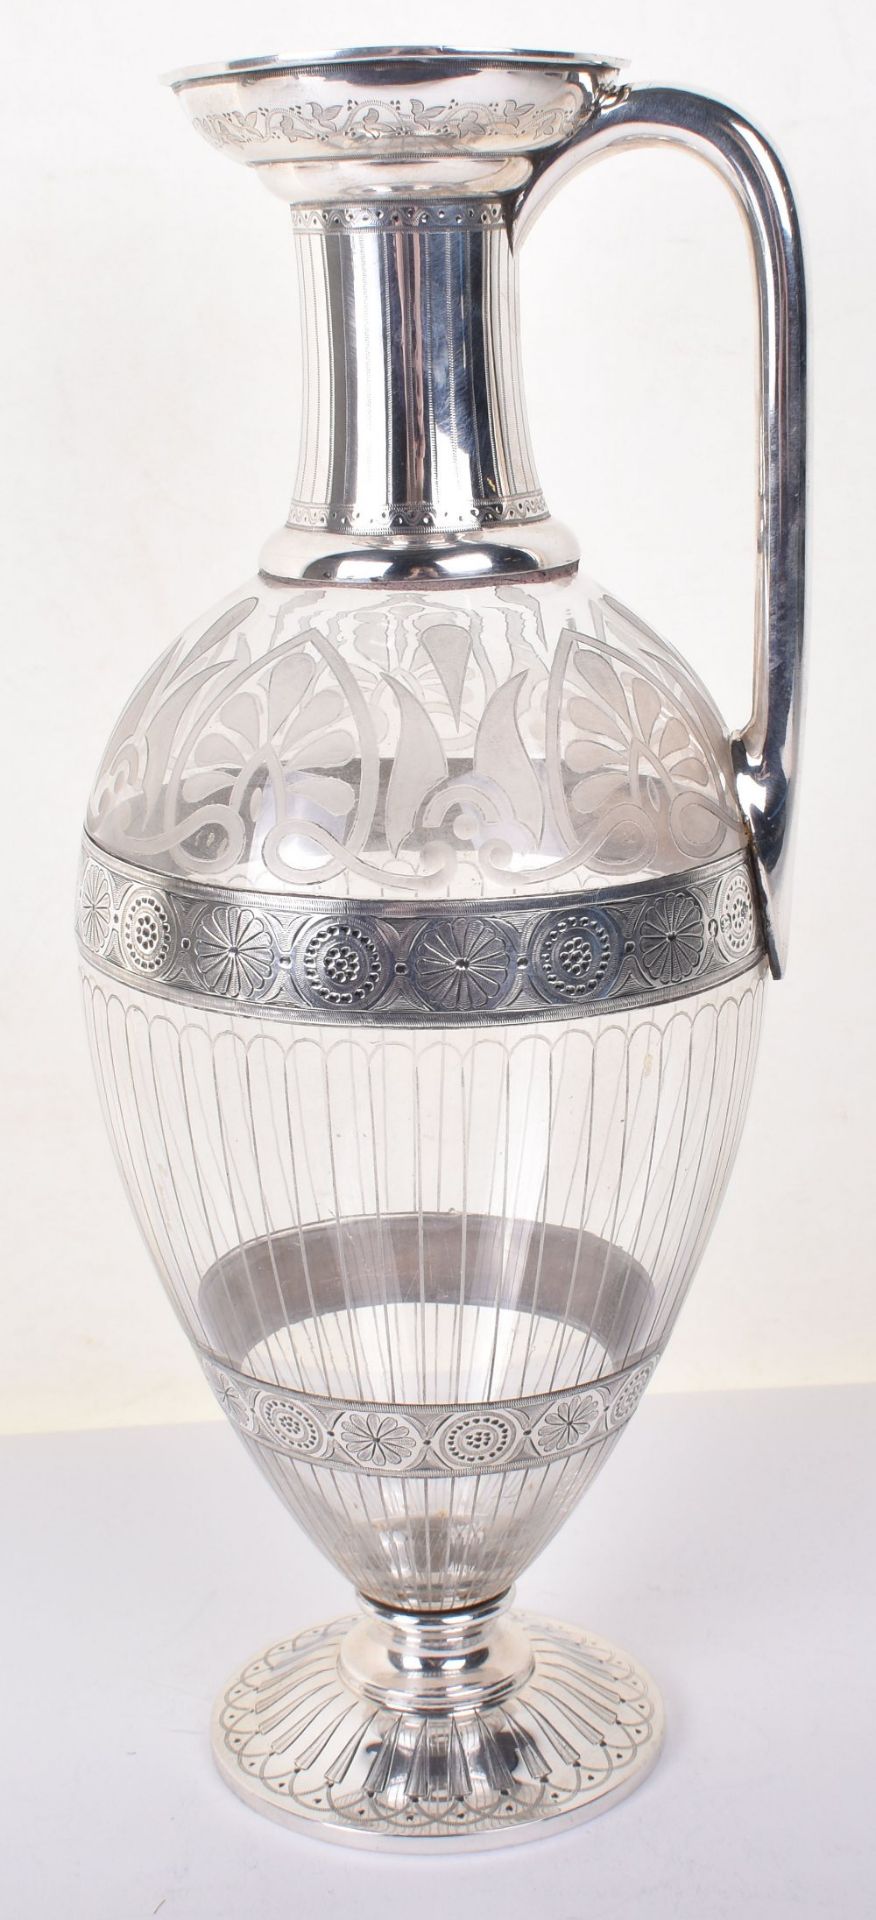 A Victorian silver and glass claret jug, by Barnard Bros, London 1874 - Image 2 of 8